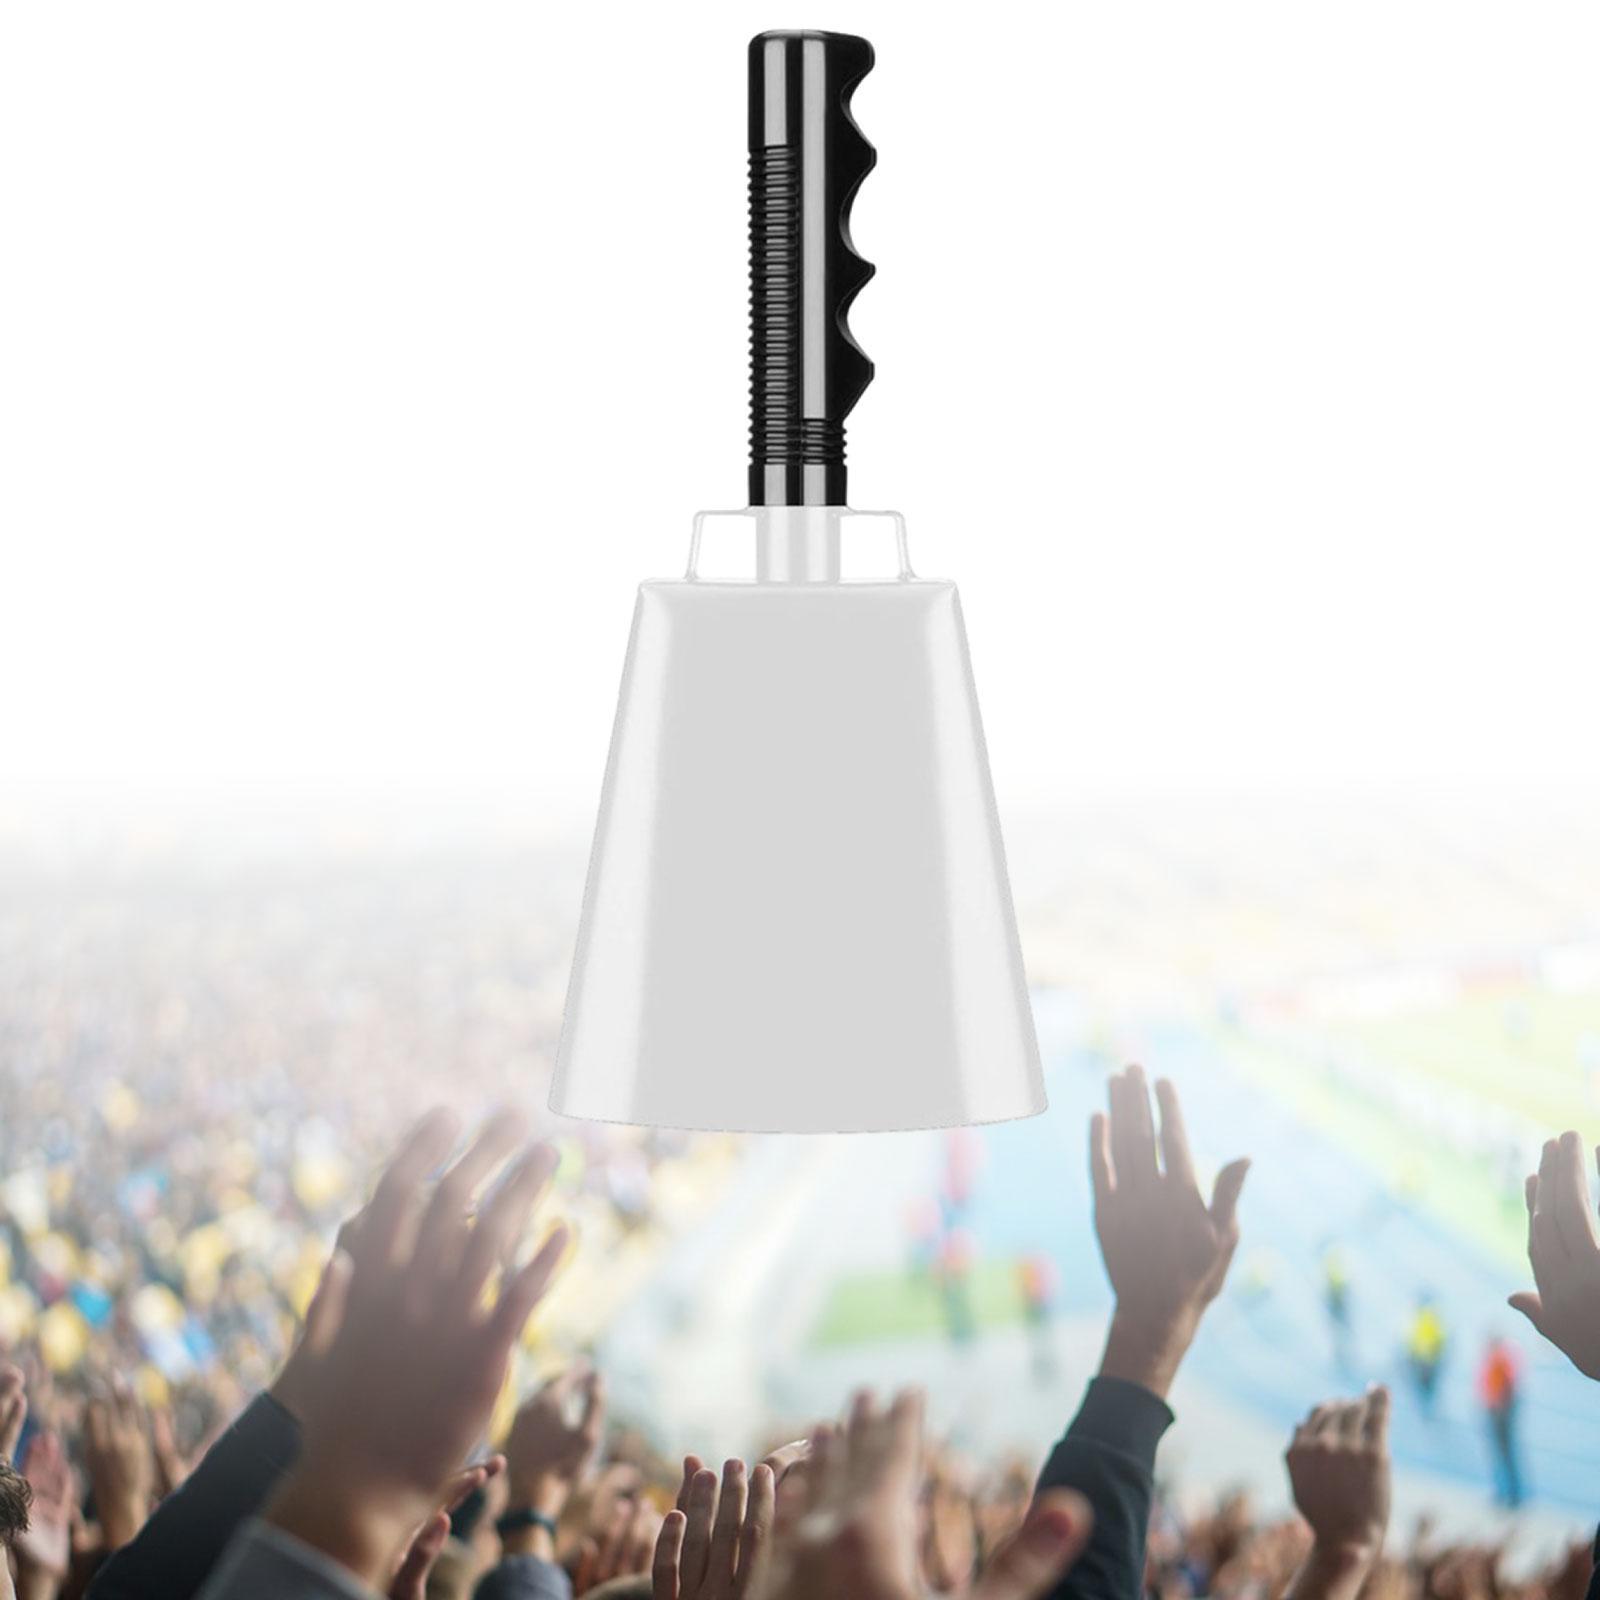 Steel Cowbell with Handle Cow Bell Cheering Bell Metal Noise Maker Loud Call Bells for Ball Games Football Hockey Event Classroom